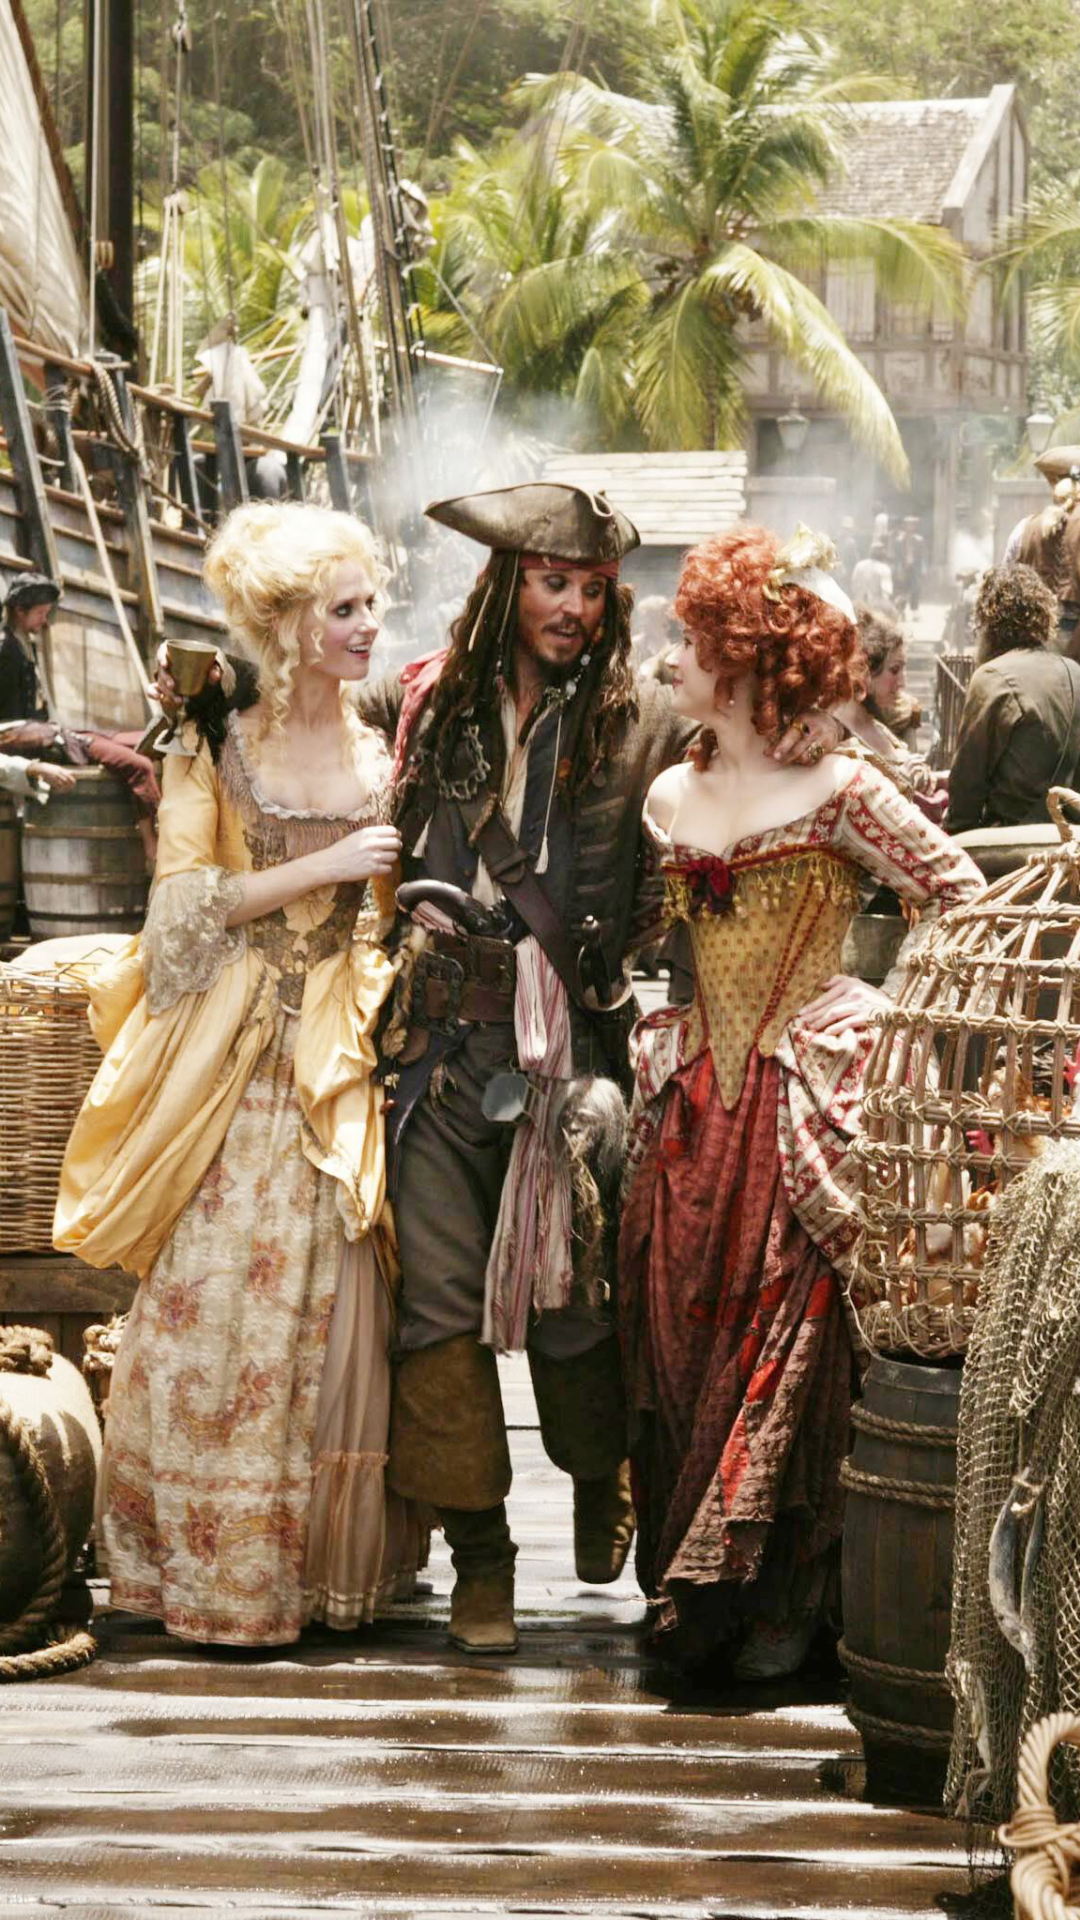 Download mobile wallpaper Pirates Of The Caribbean, Johnny Depp, Movie, Jack Sparrow, Pirates Of The Caribbean: At World's End for free.